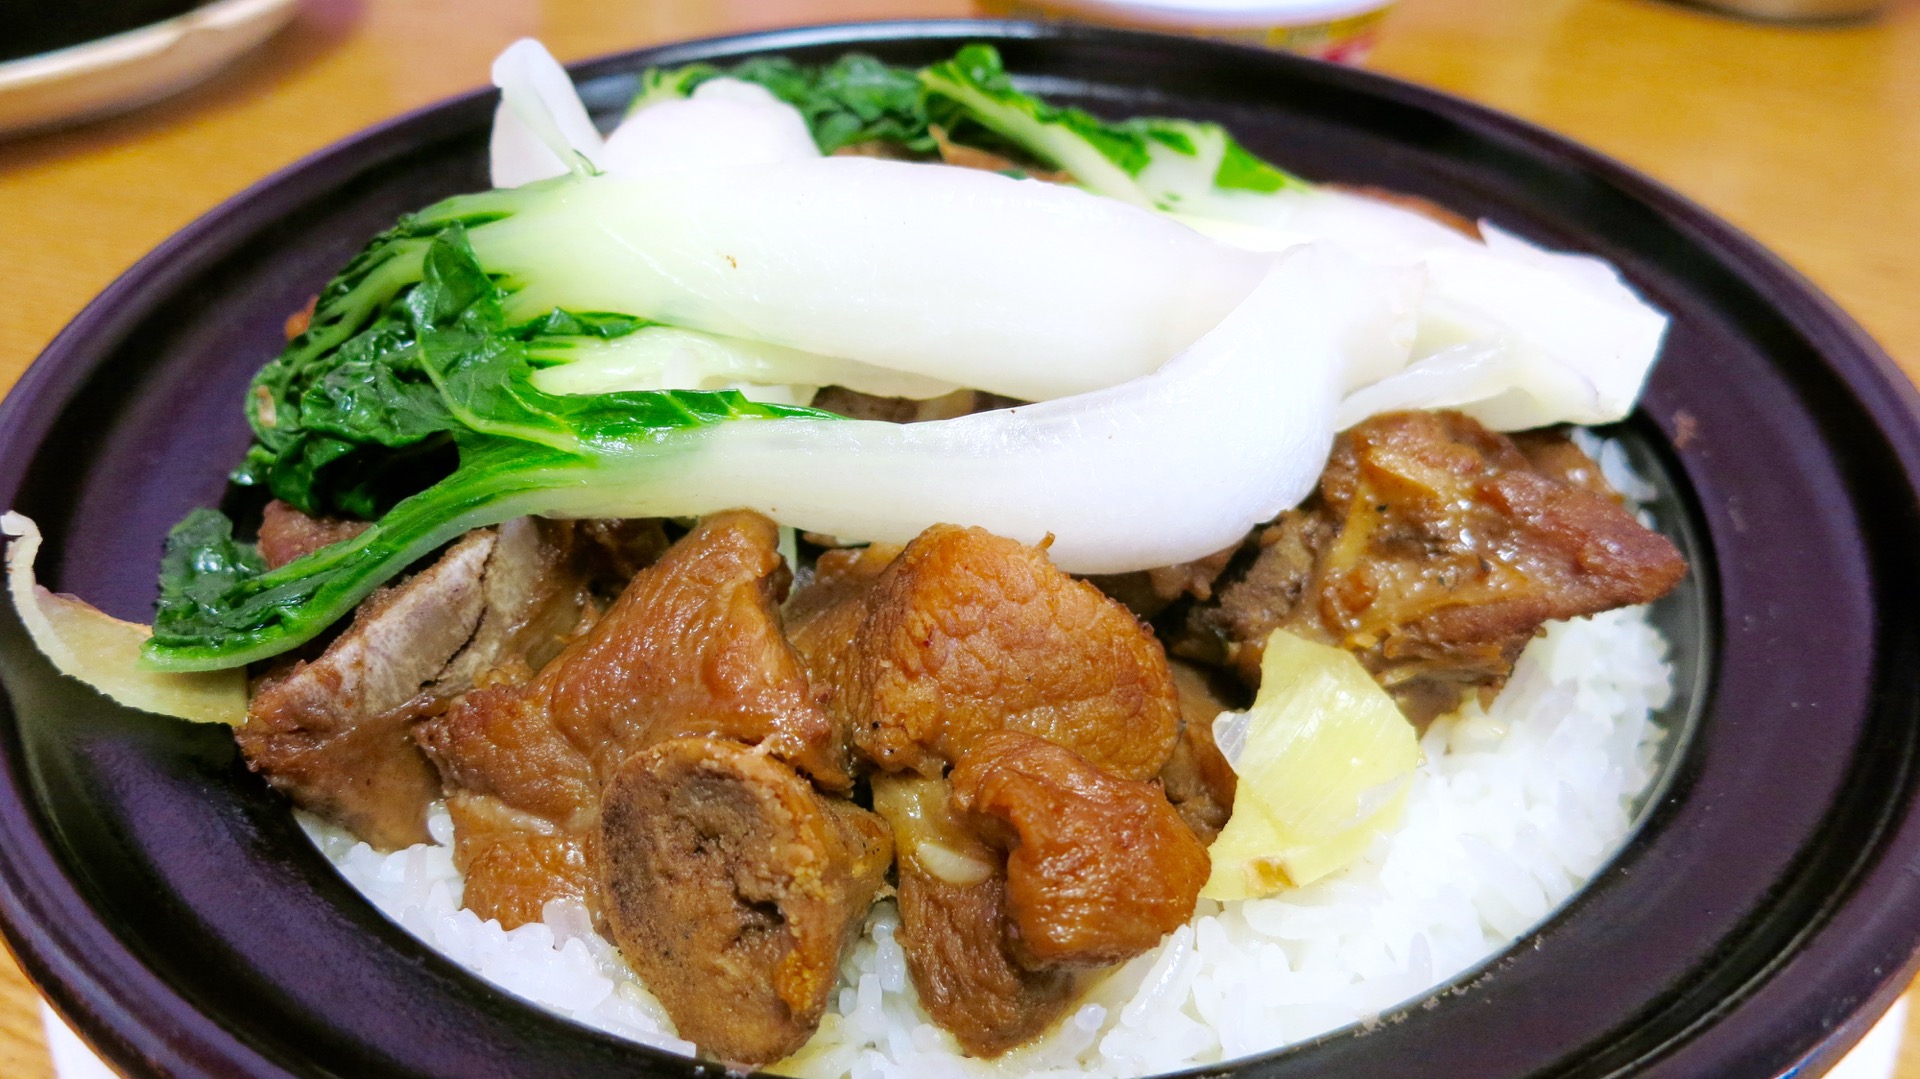 Gum Wah's pork spareribs in black bean sauce over sticky rice is an affordable and filling lunch.